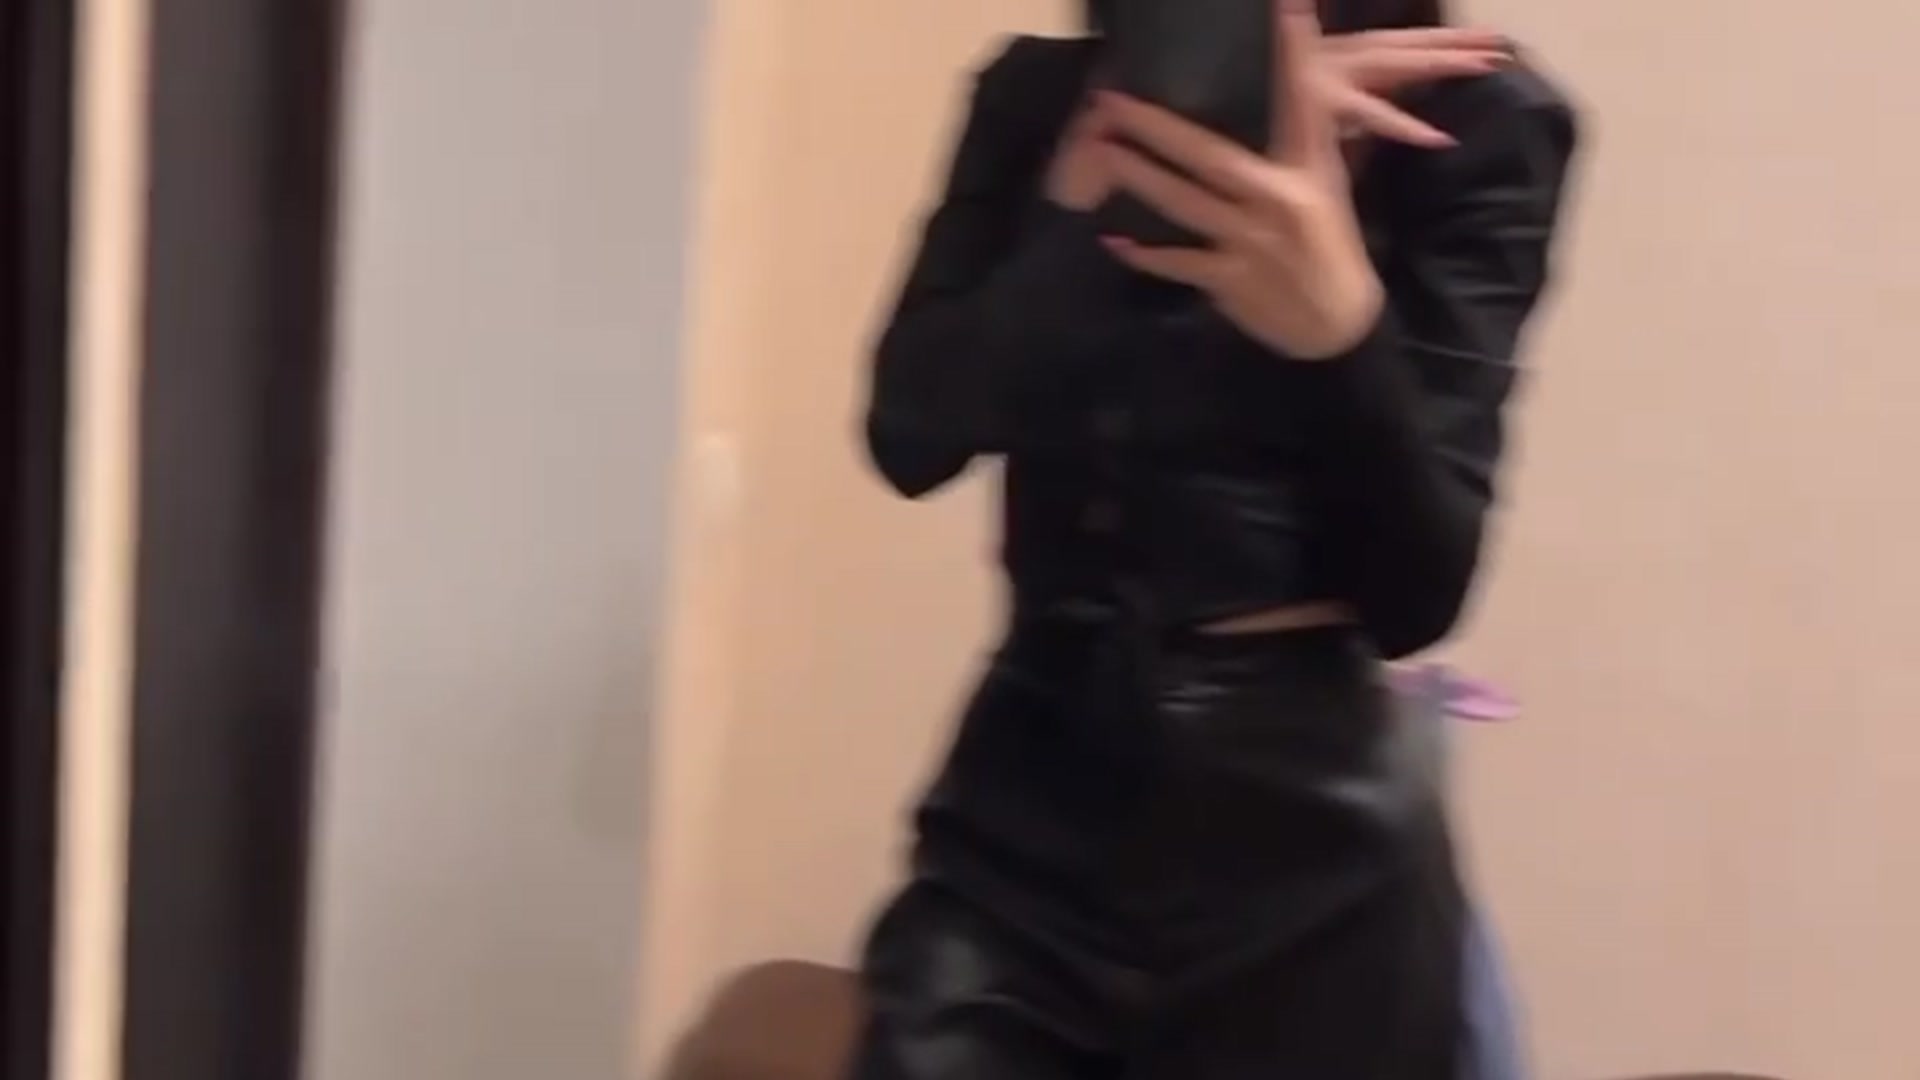 Nika shows off in front of the mirror